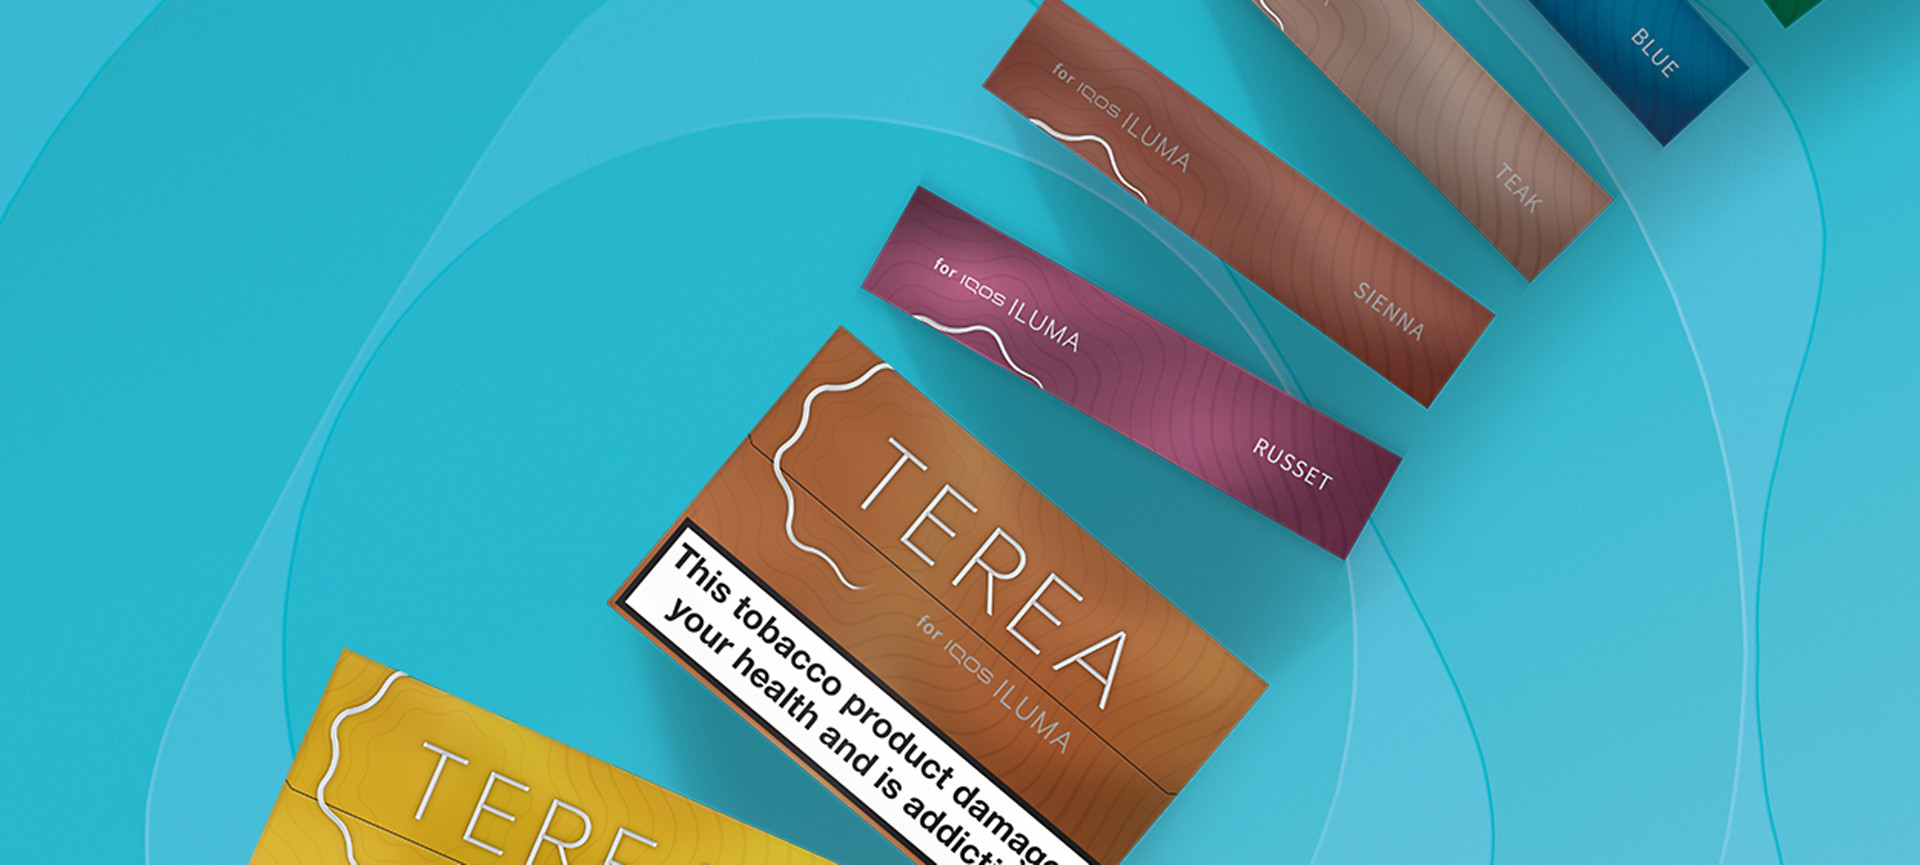 TEREA packs standing on a turquoise background, the packs include Amber, Russet, Sienna, Teak, Blue